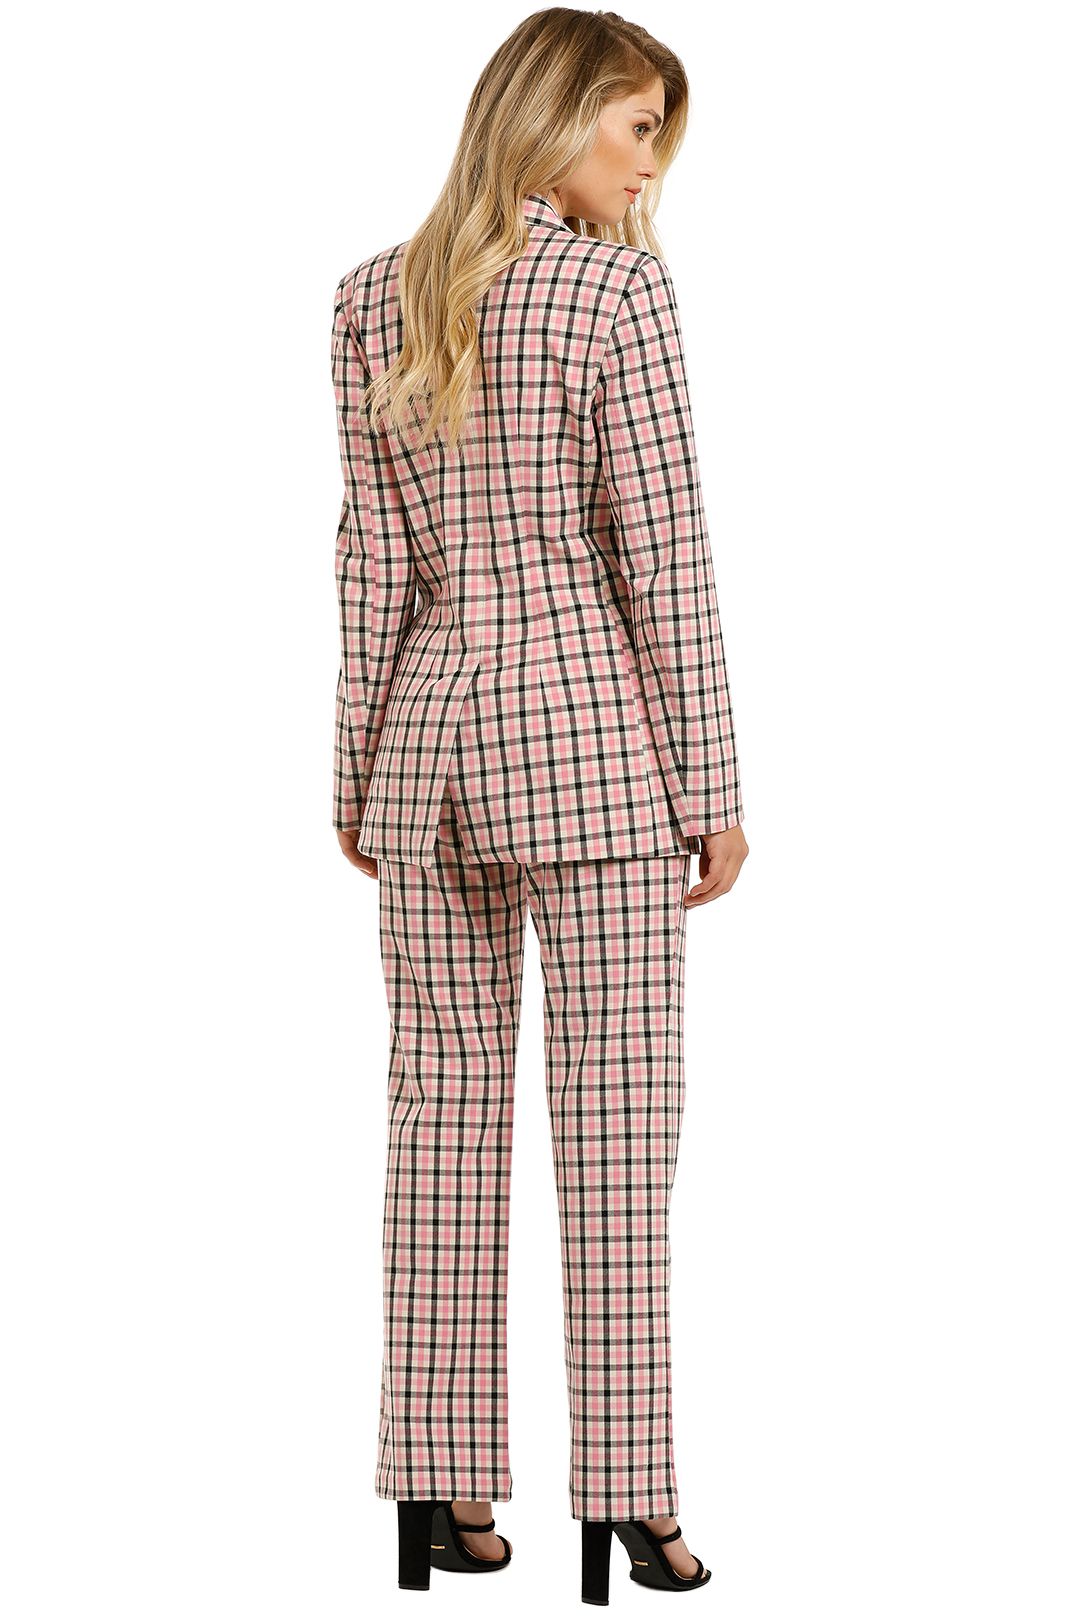 Pasduchas-Checker-Blazer-and-Pant-Suit-Pink-Check-Back